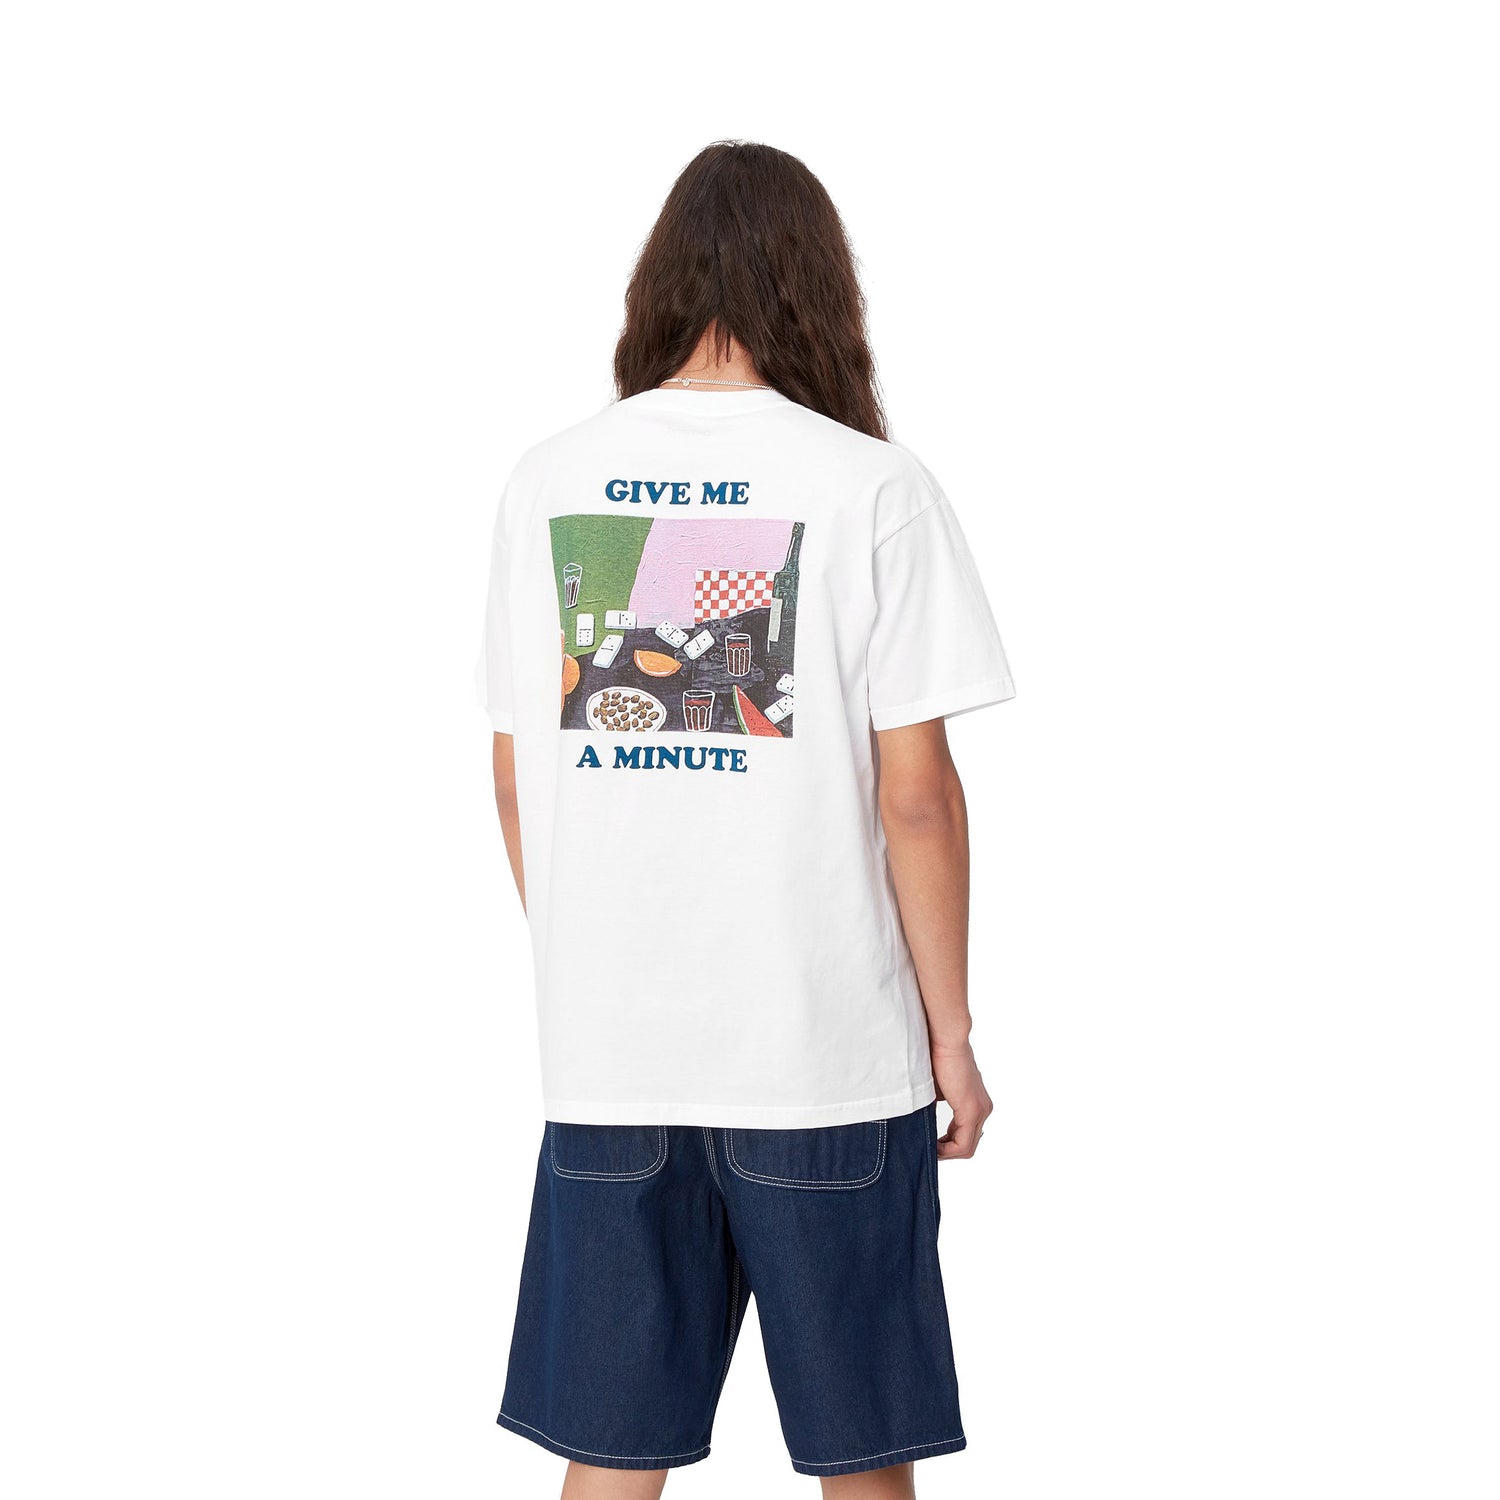 S/S ISIS MARIA DINNER T-SHIRT WHITE